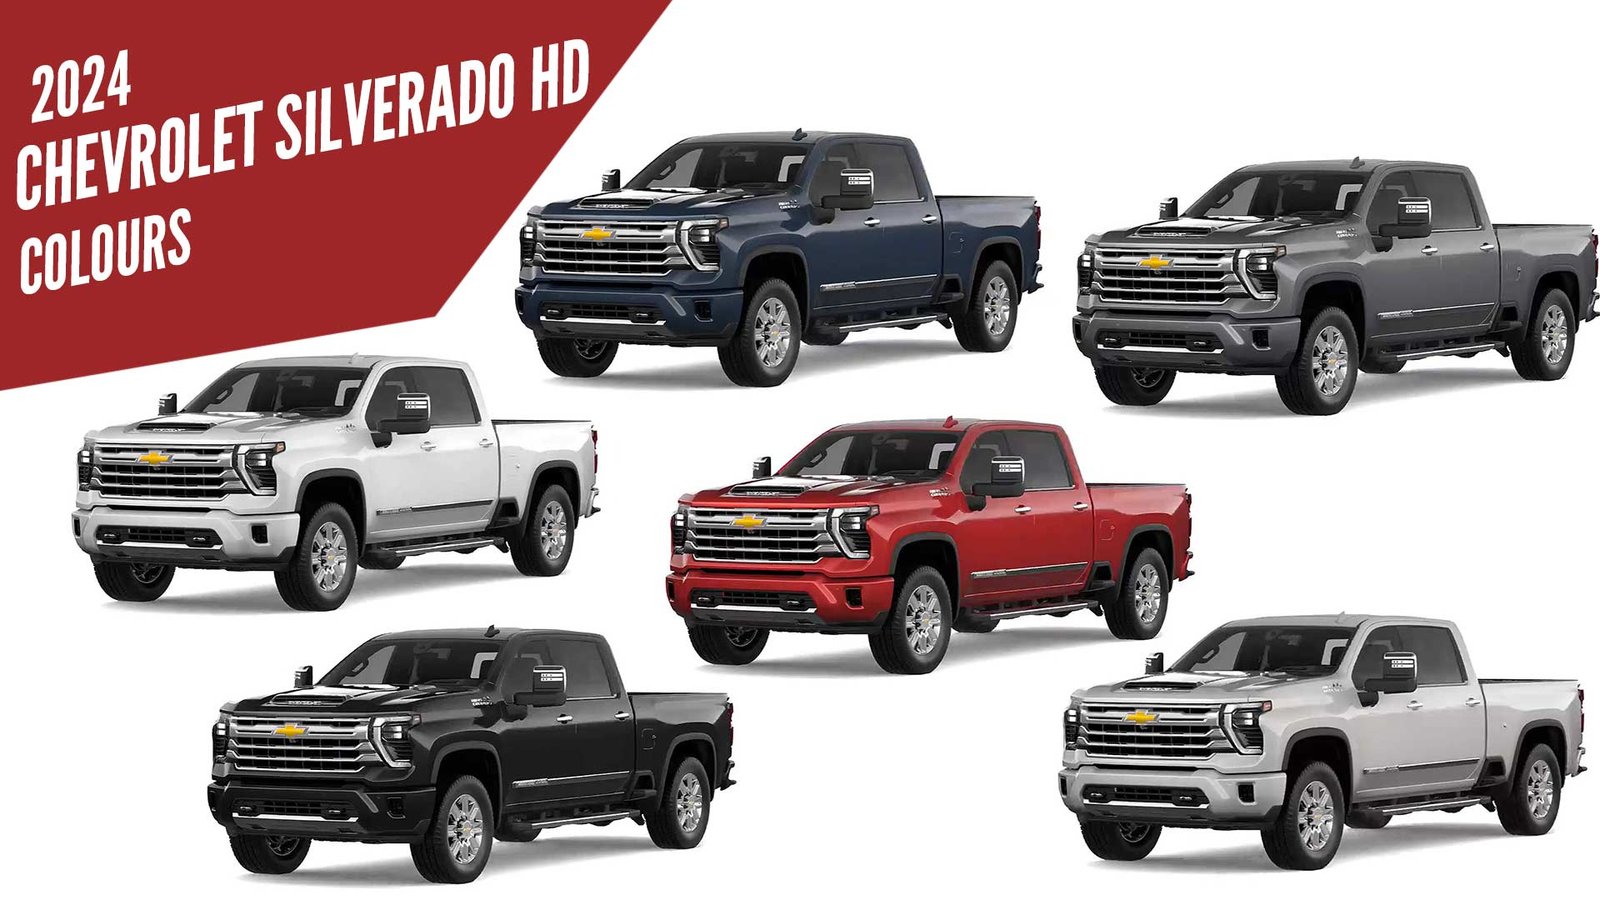 2024 Chevrolet Silverado HD Pickup Truck All Color Options Images